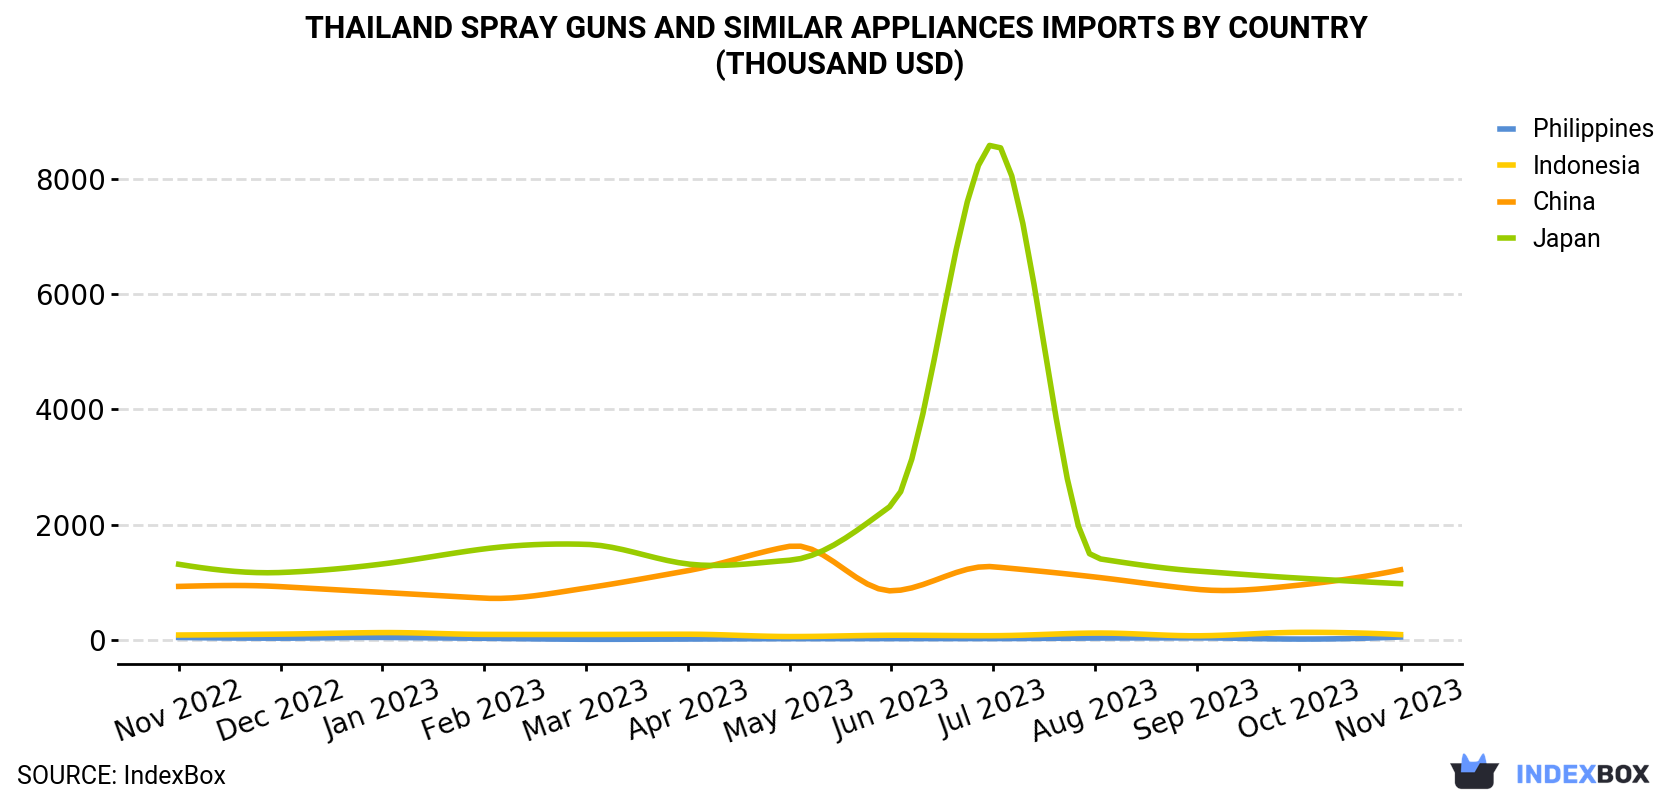 Thailand Spray Guns And Similar Appliances Imports By Country (Thousand USD)